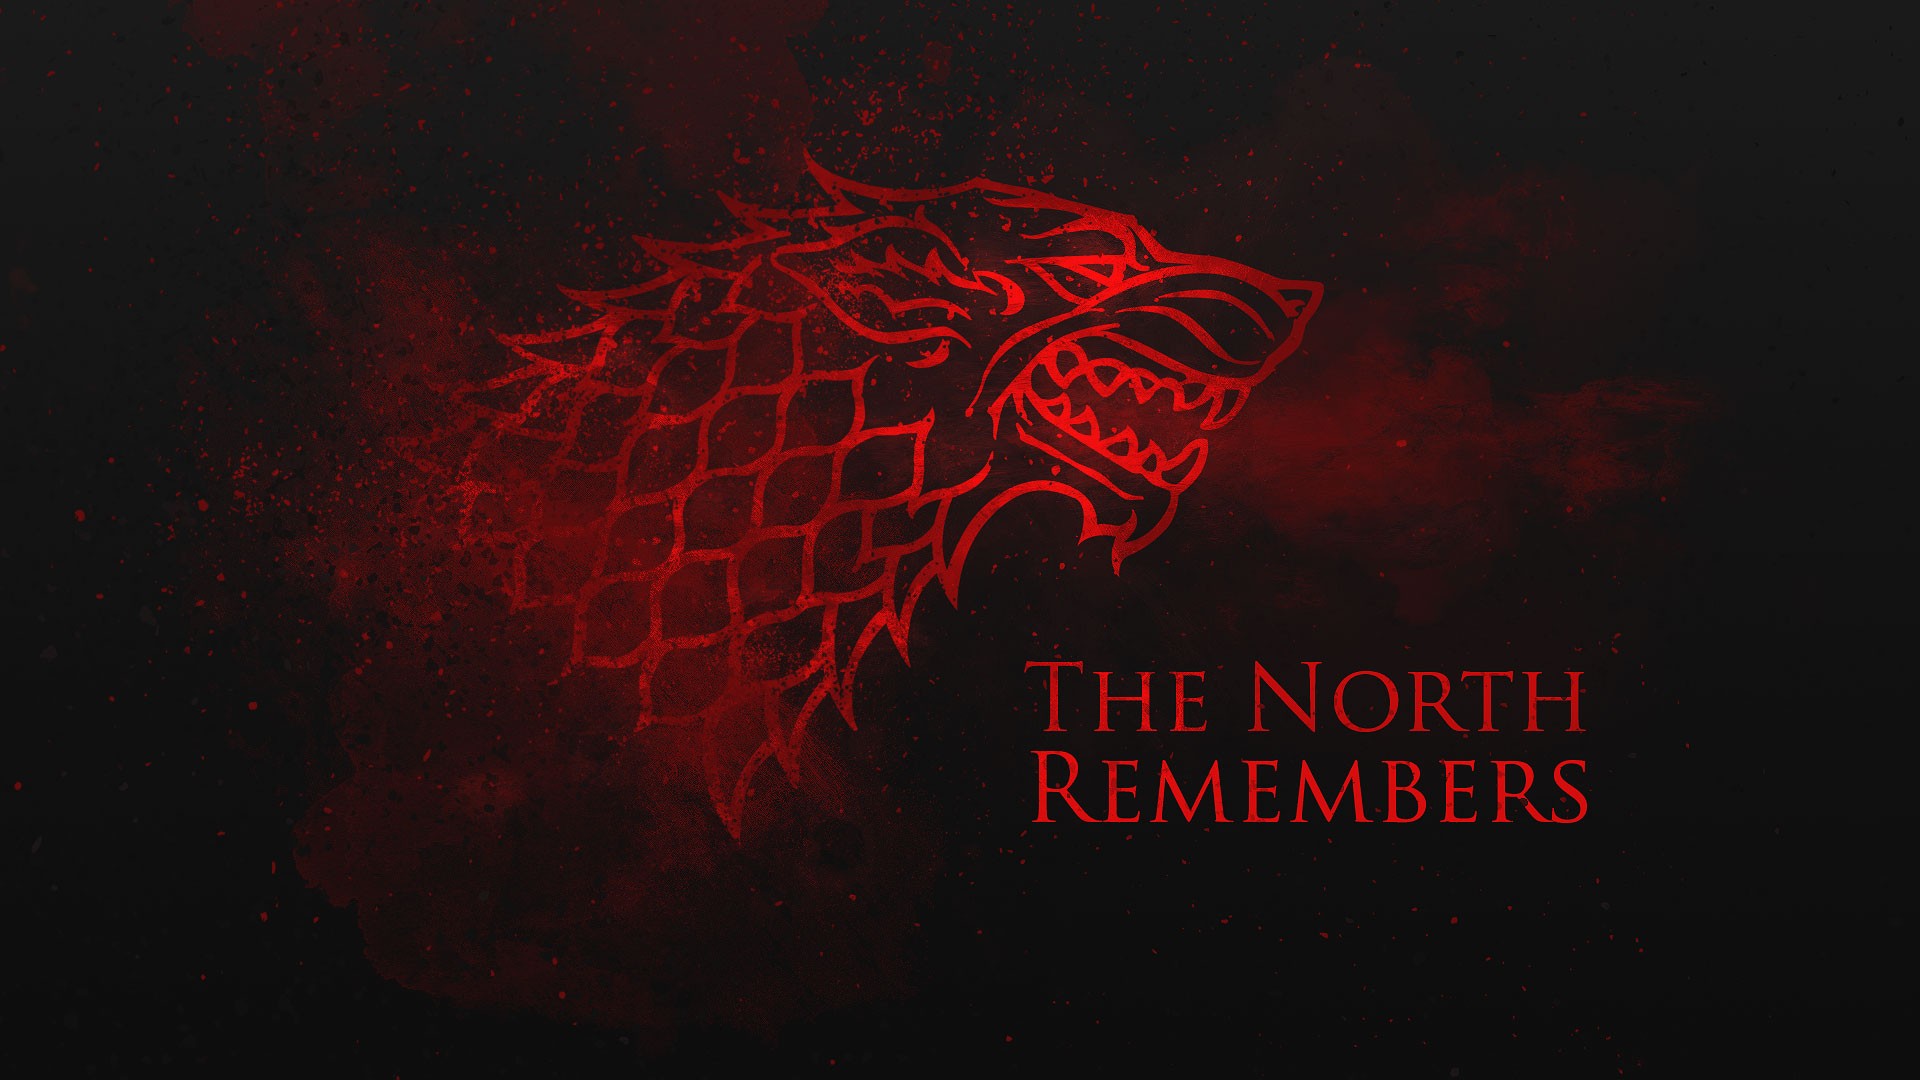 The North Remember